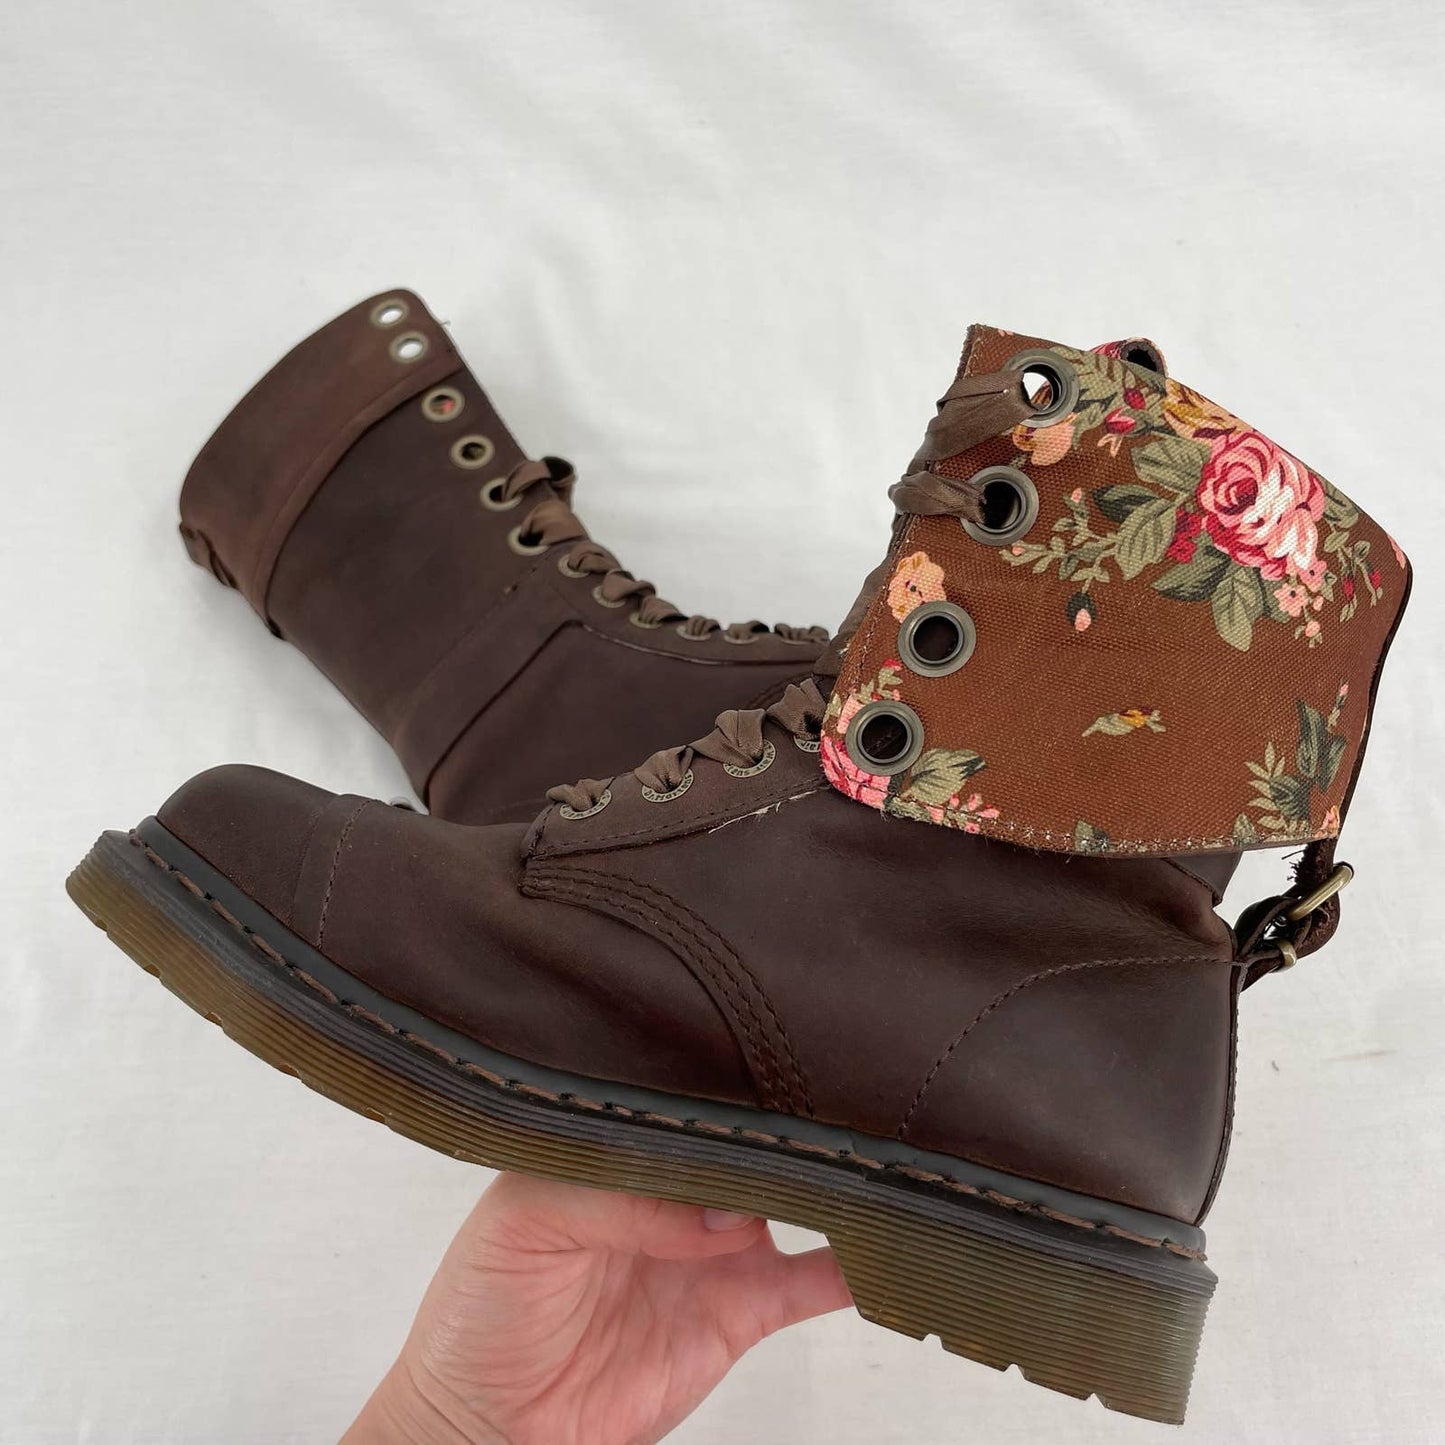 Dr. Martens Triumph Boots Brown Leather Pirate Style Fold Down Floral Lining Size 7